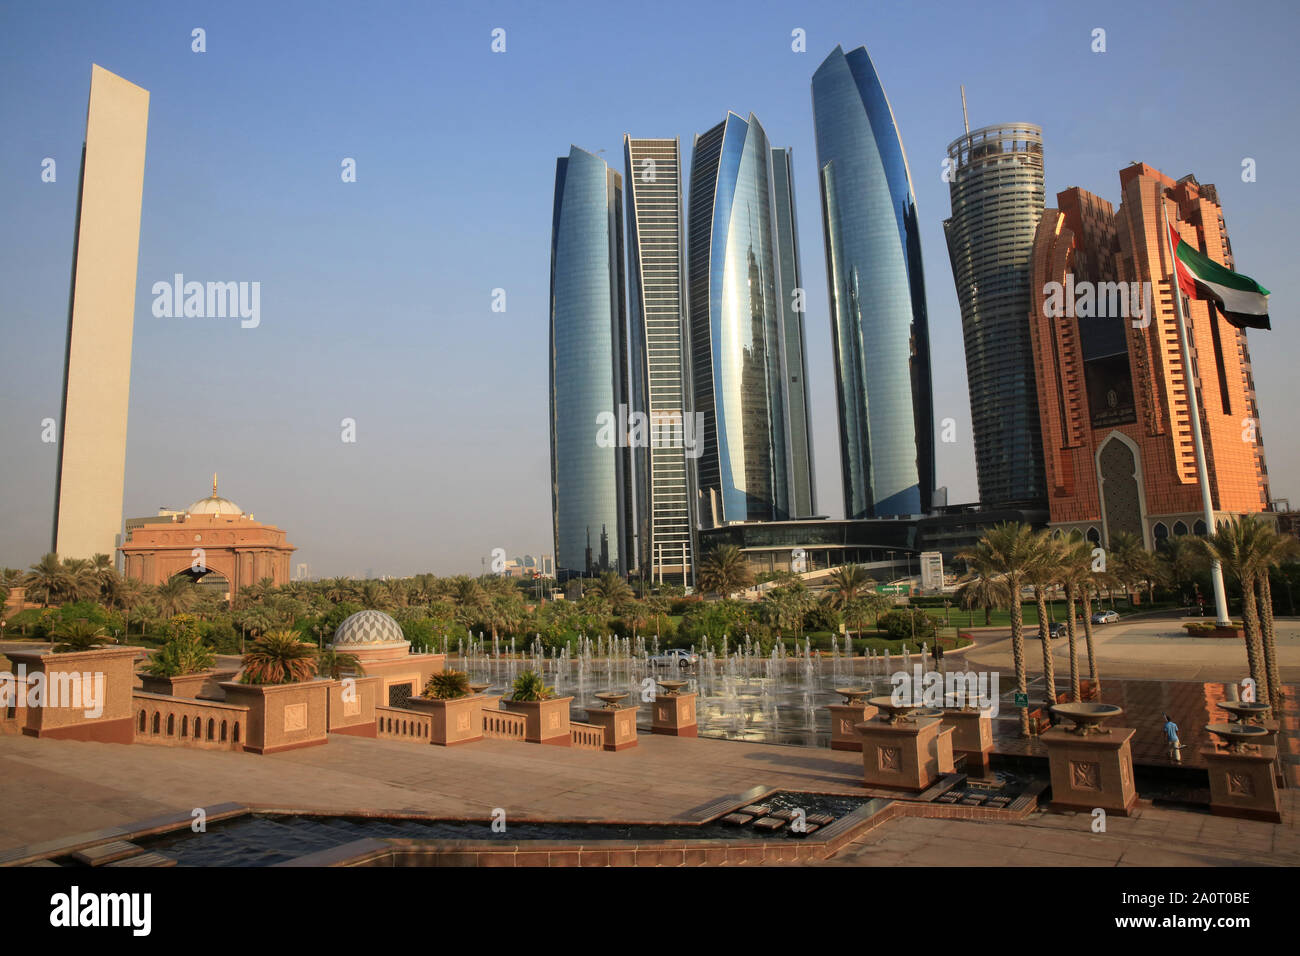 Le quartier général d'ADNOC. Les tours Etihad. Etihad Towers viewed over the fountains of the Emirates Palace Hotel. Jumeirah. 2007-2011. Abou Dhabi. Stock Photo